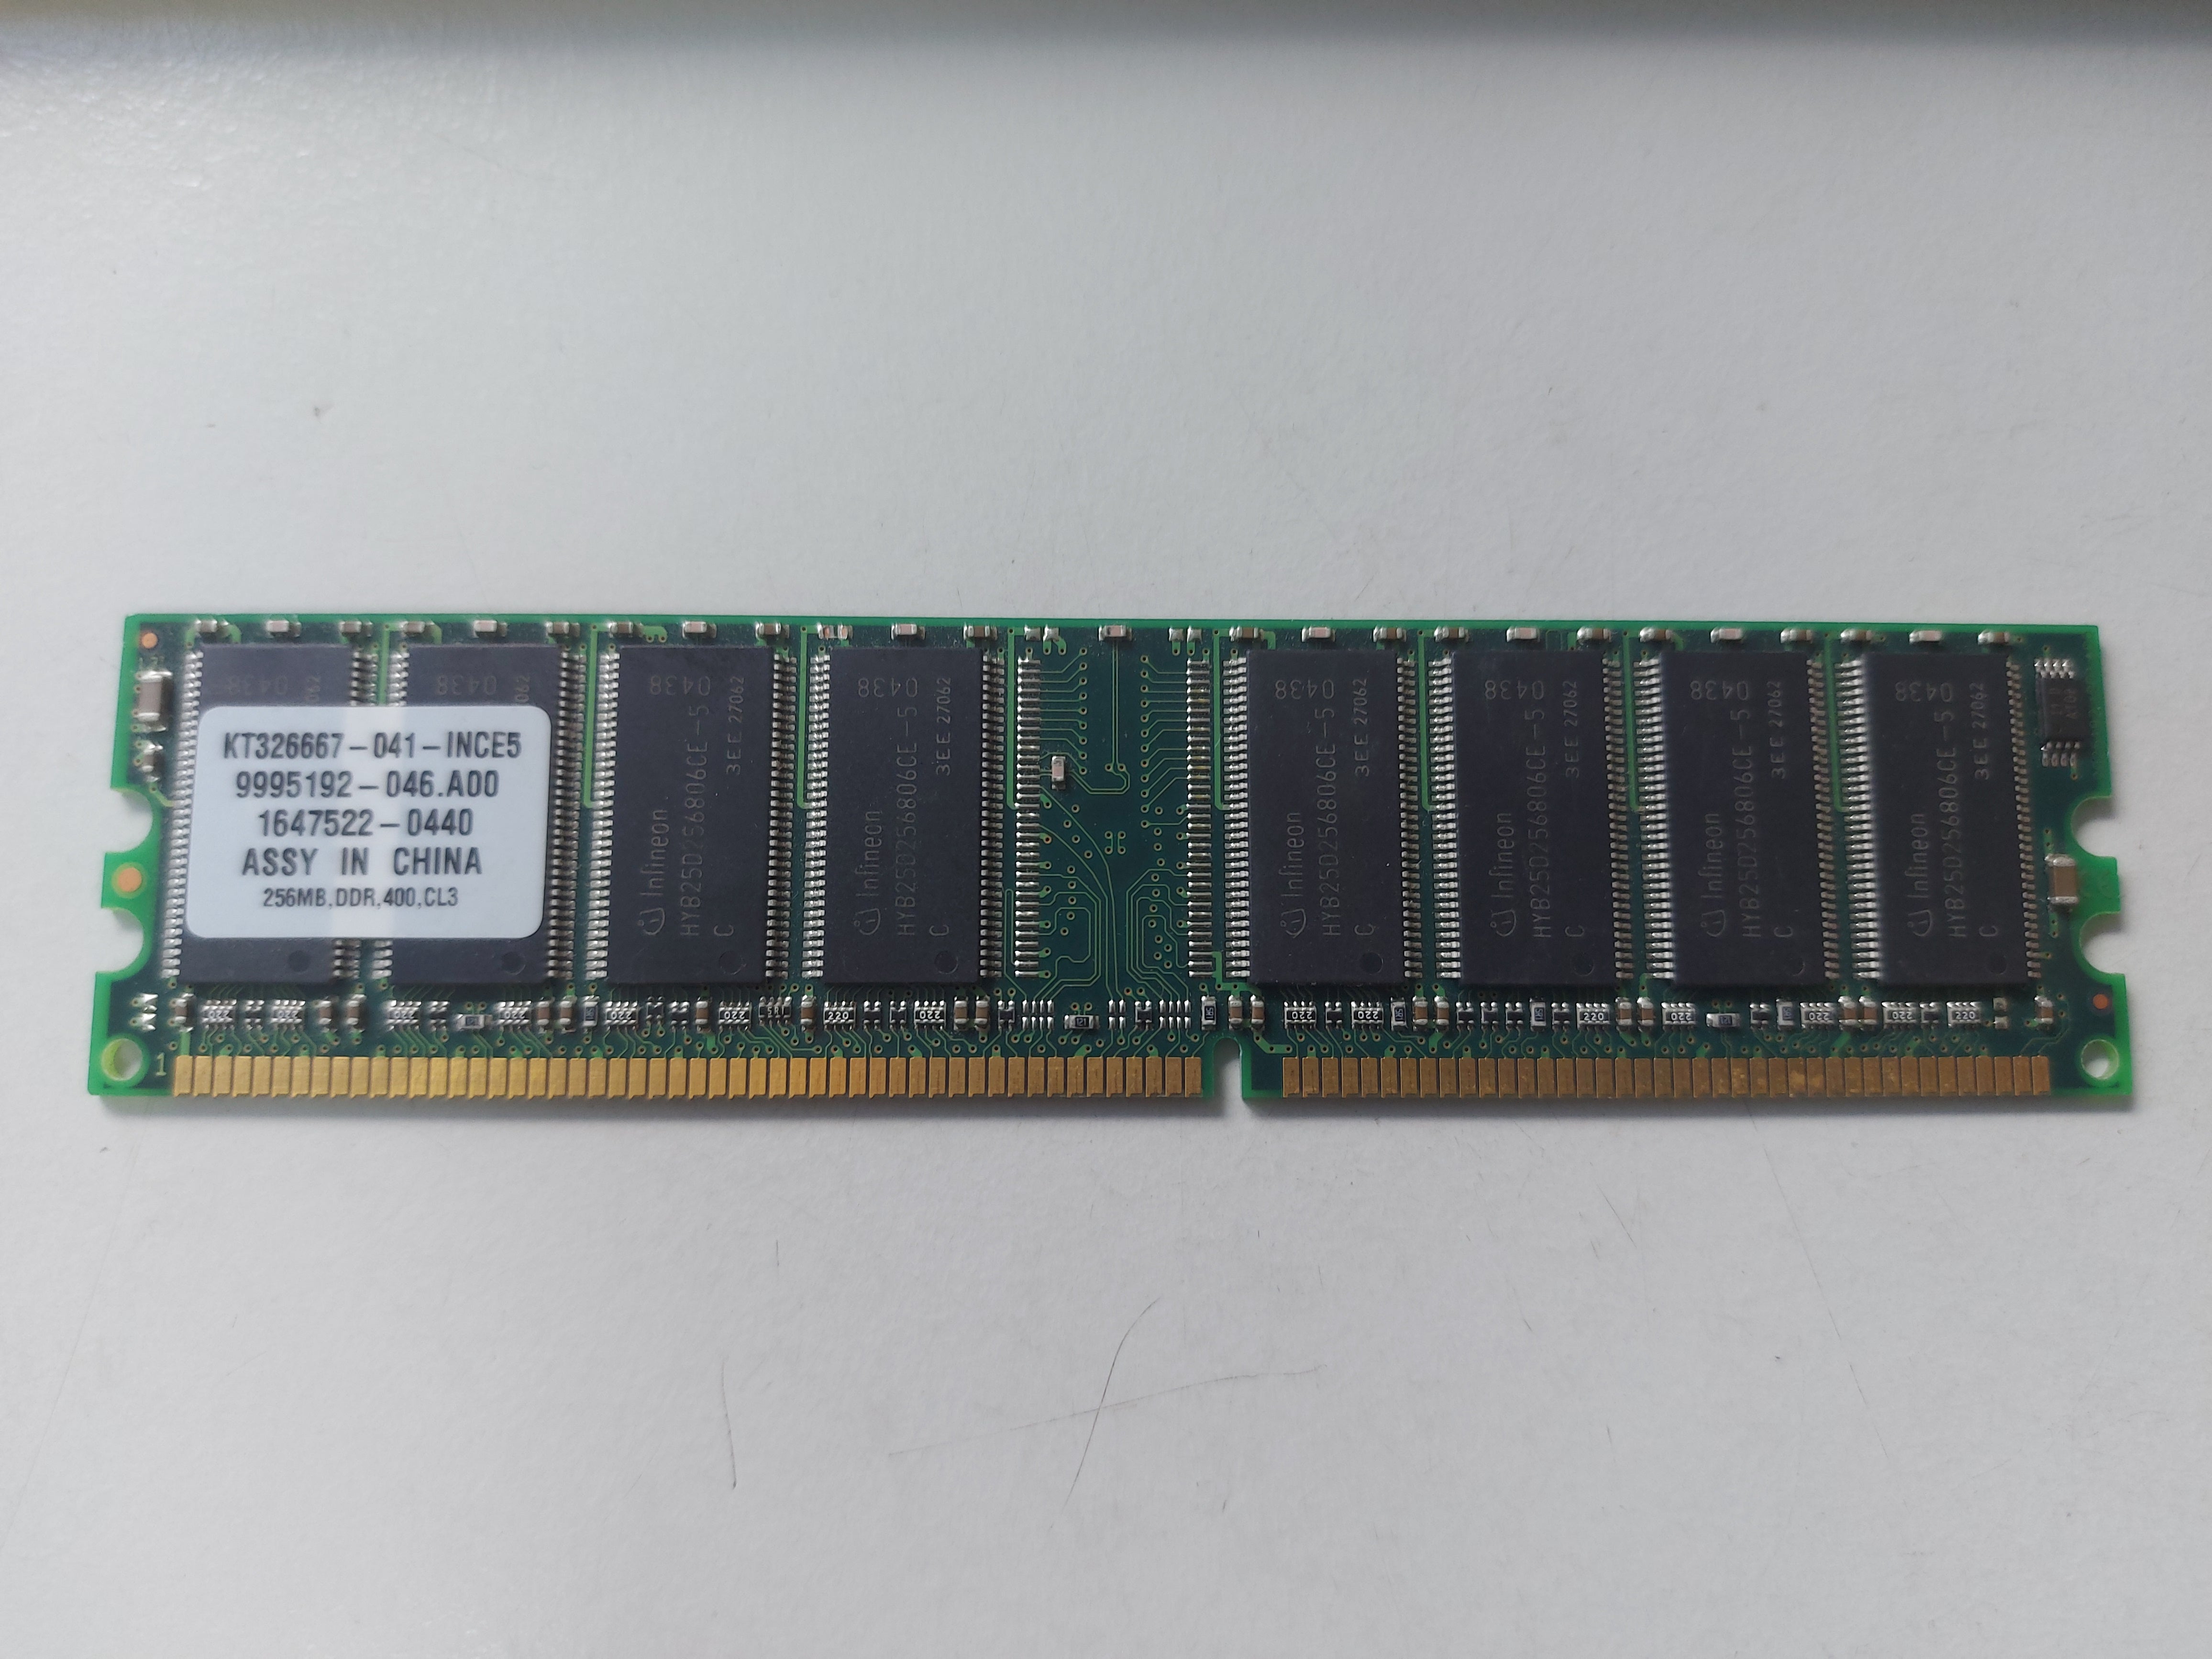 Kingston HP 256MB PC3200 DDR-400MHz non-ECC Unbuffered CL3 184-Pin DIMM ( KT326667-041-INCE5 9995192-046.A00 326667-041 ) REF